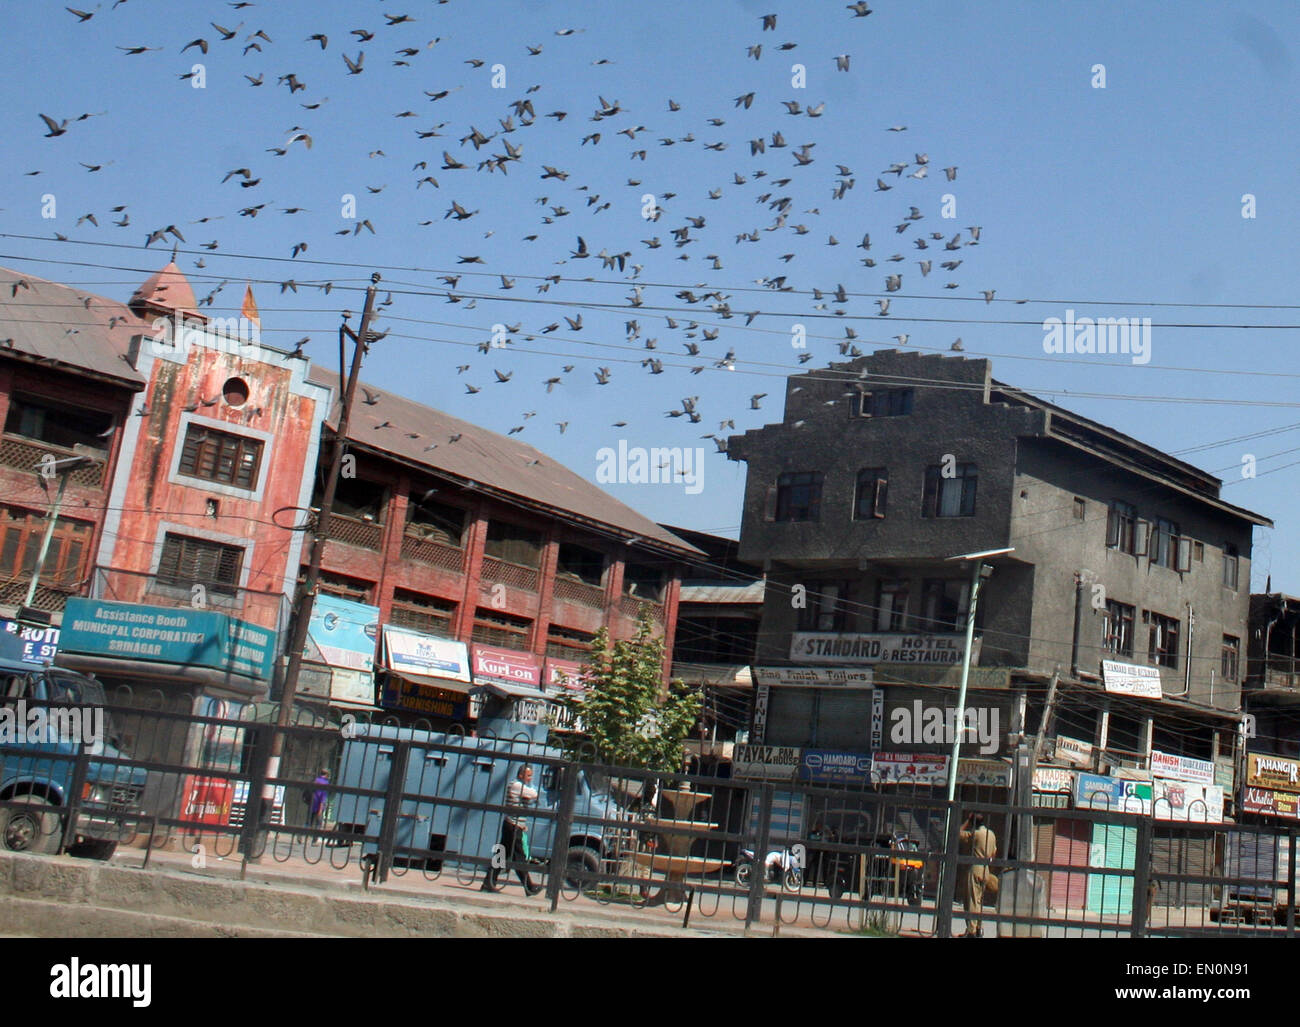 Srinagar, Indian Administered Kashmir: 25April . Piegons flies over sky early morning during Strike Separatist leaders in Kashmir have called a shutdown in the Valley to protest against the detention of hardliner Masarat Alam Bhat under the Public Safety Act (PSA), Masarat Alam, who was released from jail only last month, could be kept in detention for two years without any trial.Masarat Alam's police custody ends today His release by the new PDP-BJP government in Jammu and Kashmir had triggered a huge controversy. Credit:  sofi suhail/Alamy Live News Stock Photo